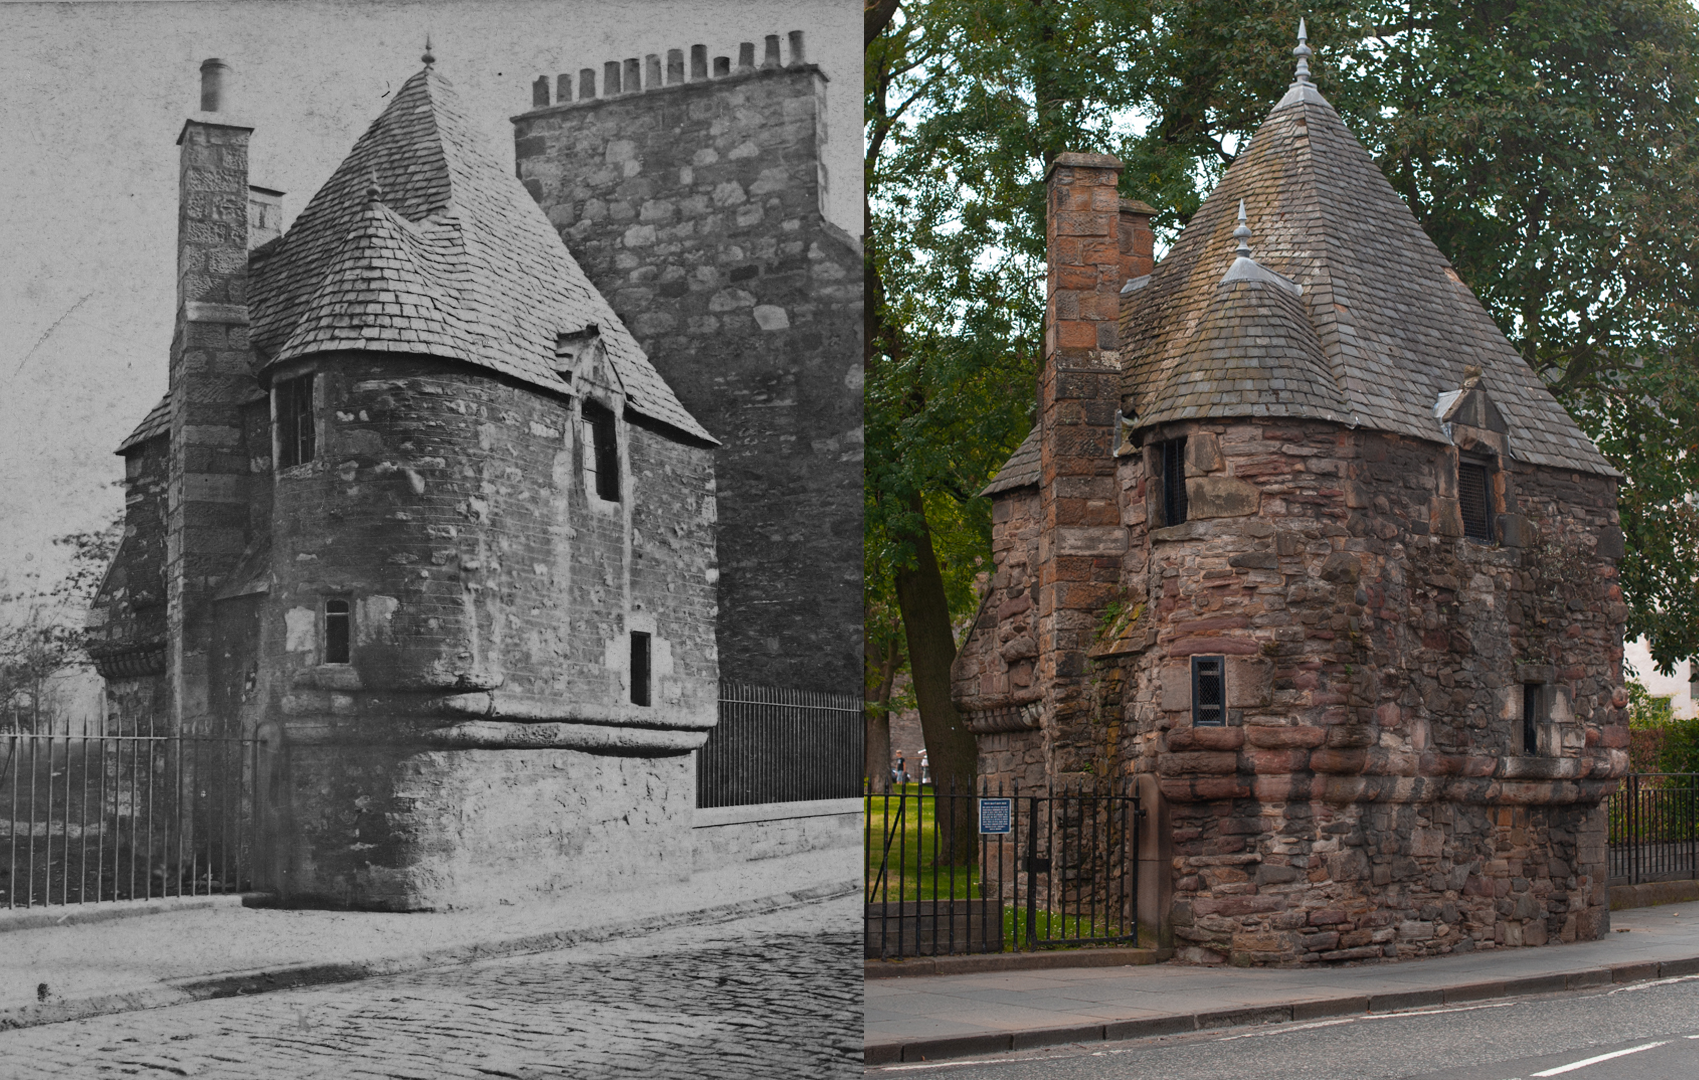 Queen Mary's Bath House near Holyrood Palace in 1860s versus today